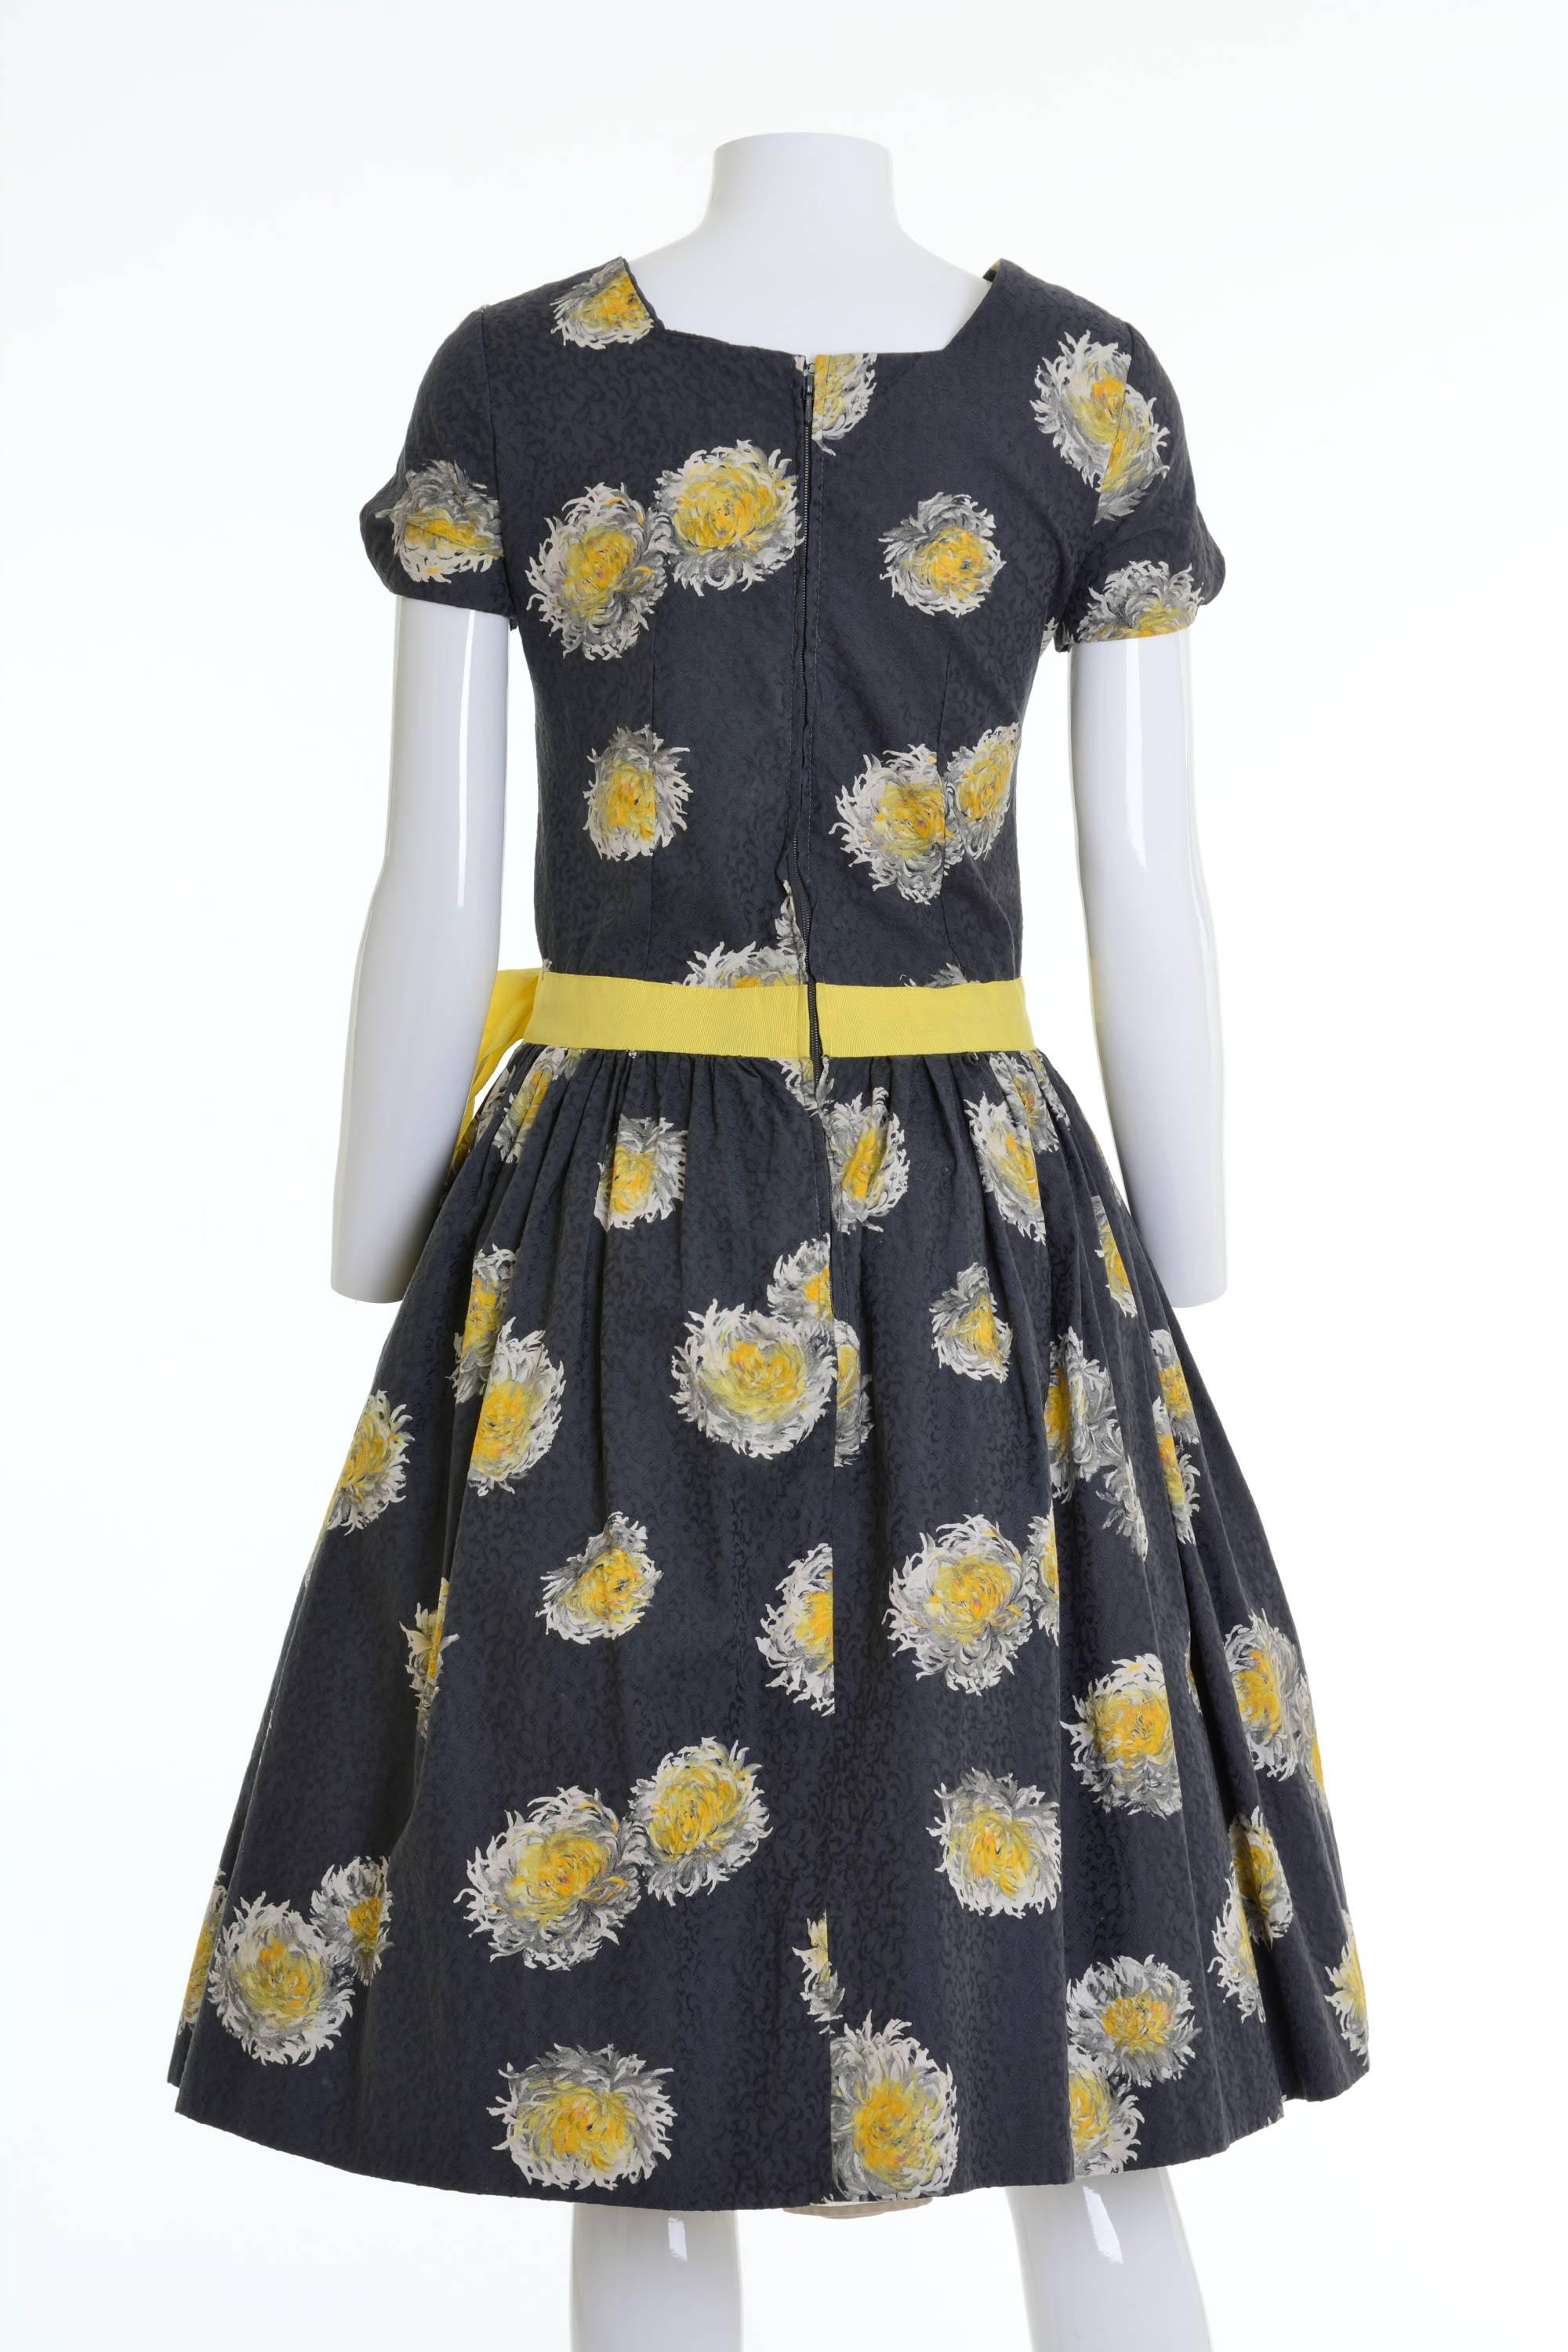 1950s cocktail dress in a grey cotton pique fabric with painted flower textile, yellow waist strap, back zip closure, fully skirt with a lot of fabric in the hem, to be able to stretch.

Excellent Vintage Condition 

Label: Unknown 
Fabric: